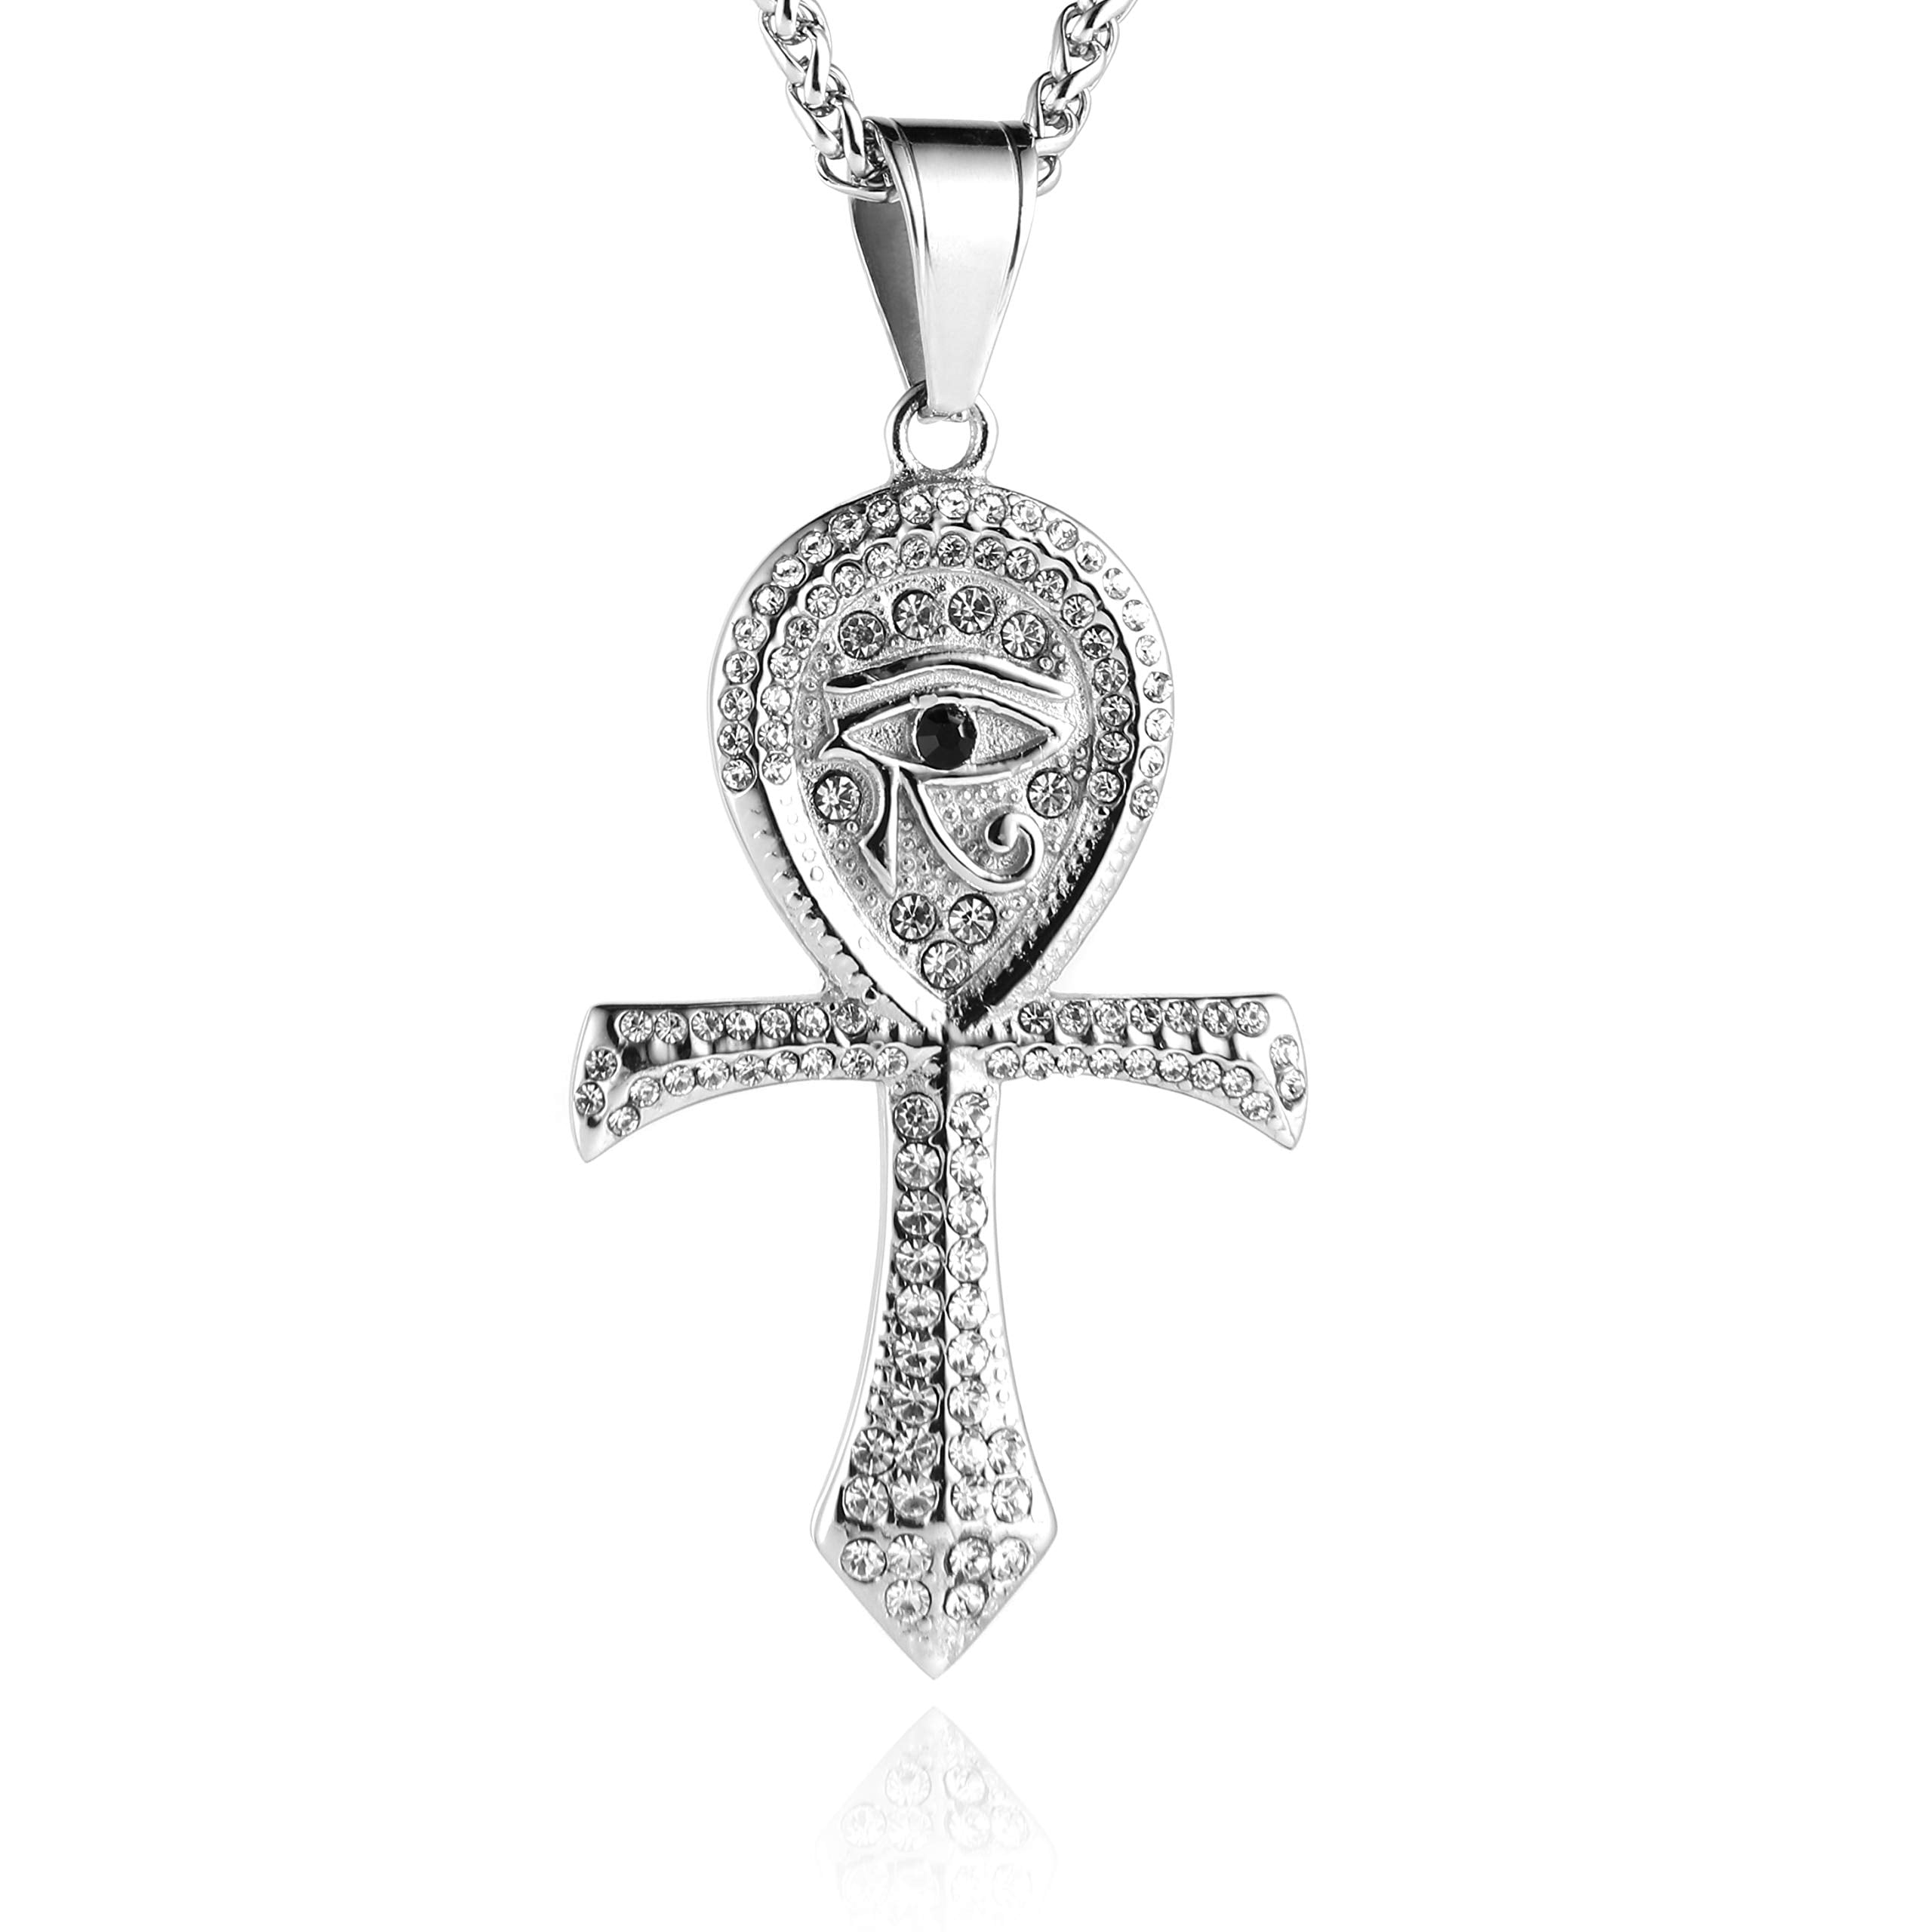 5-10pcs/lot 54*23mm Large Size CZ Paved Egypt Eyes of Horus Ankh Cross Charms for Necklace Bracelet Marking | Charms | Charms Beads Beyond 10pcs / Mix